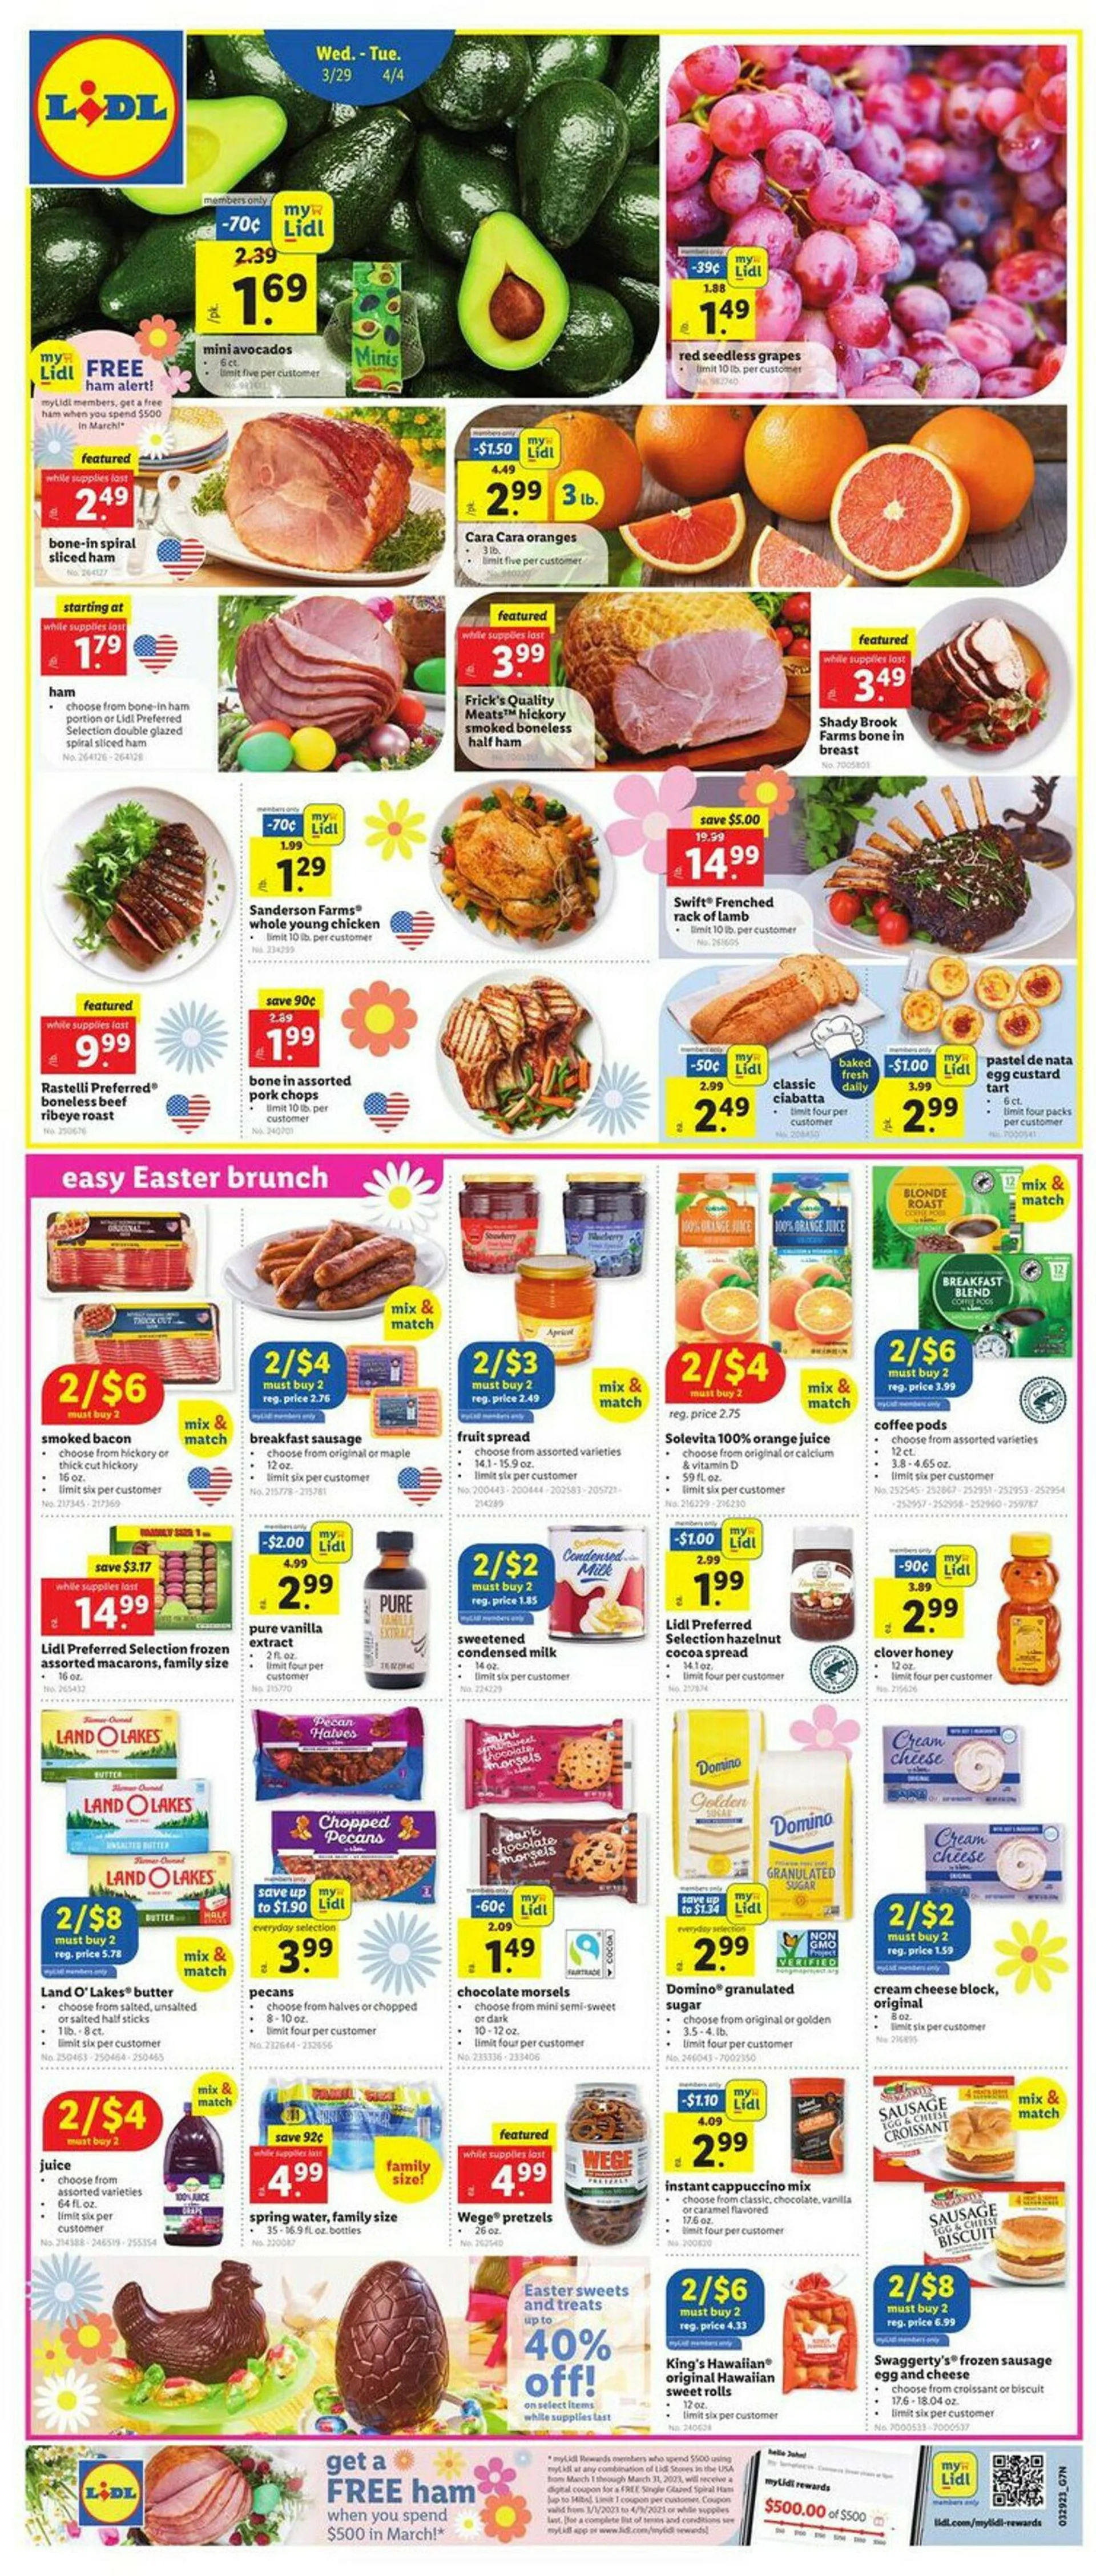 Lidl Current weekly ad - 1